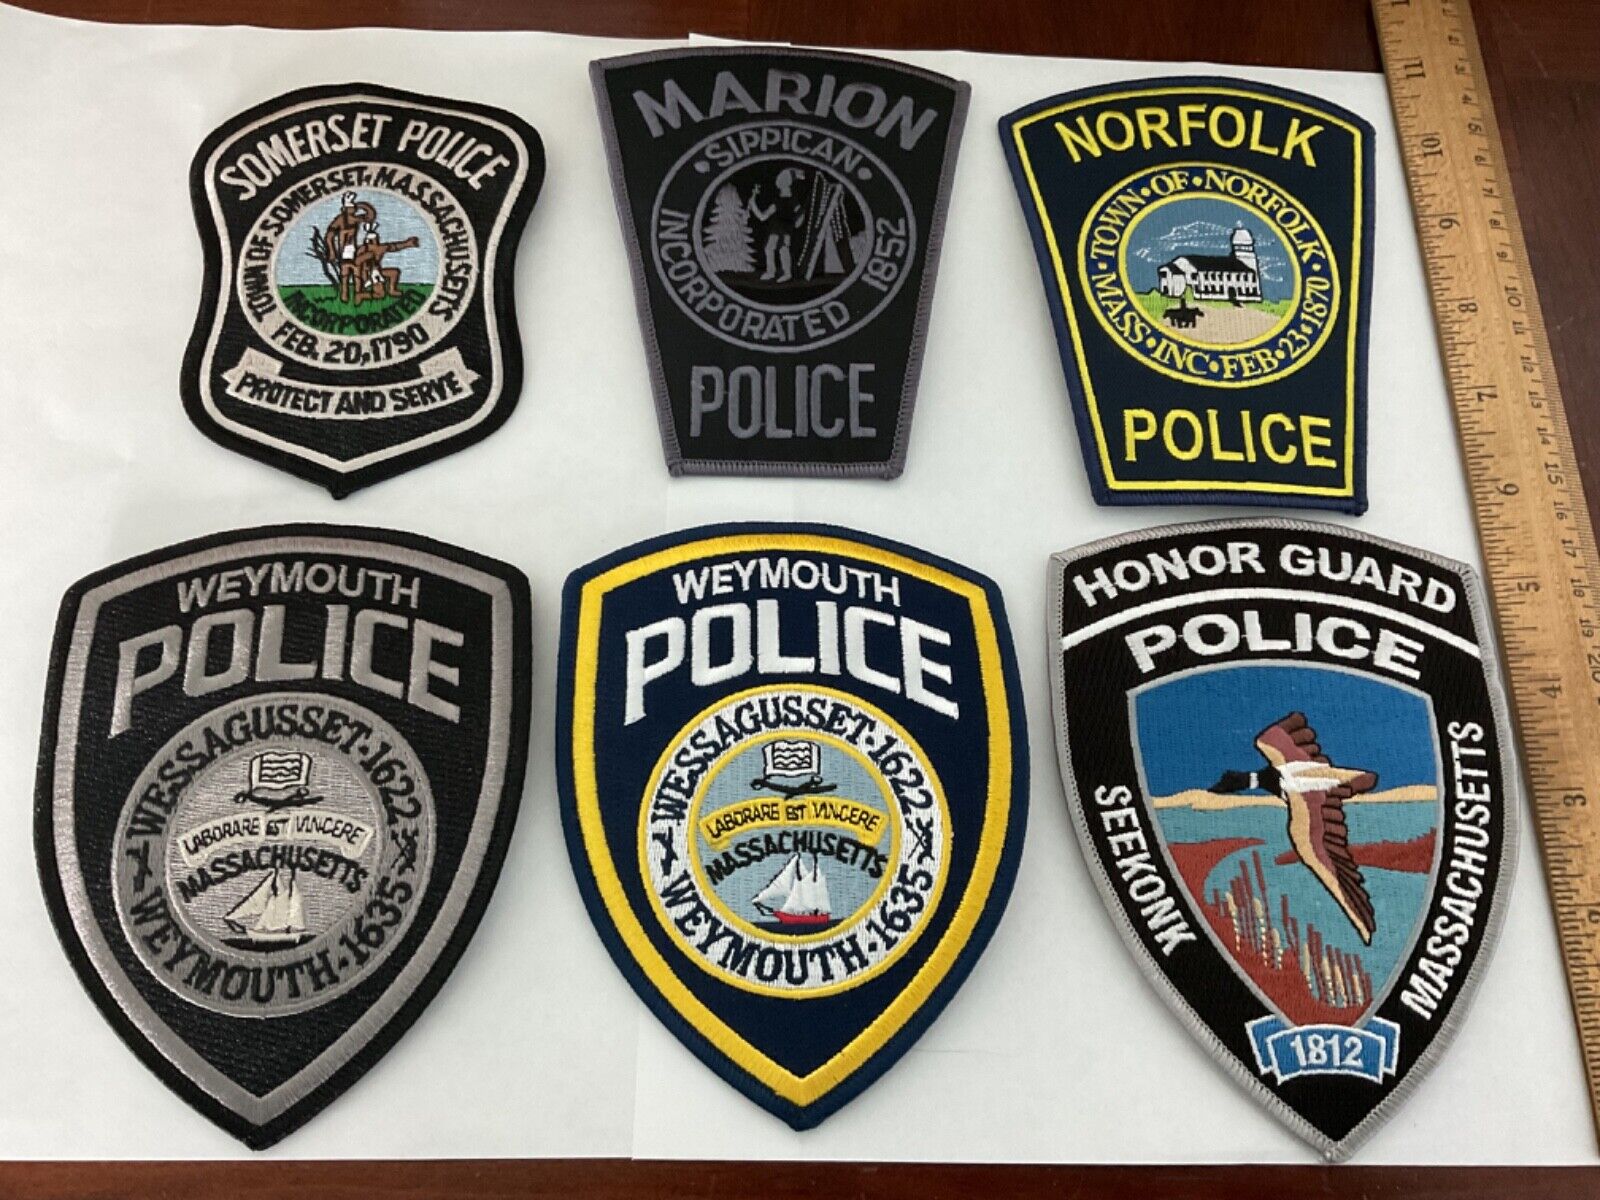 Police Law Enforcement patches All different 6 piece set. All new.Full size